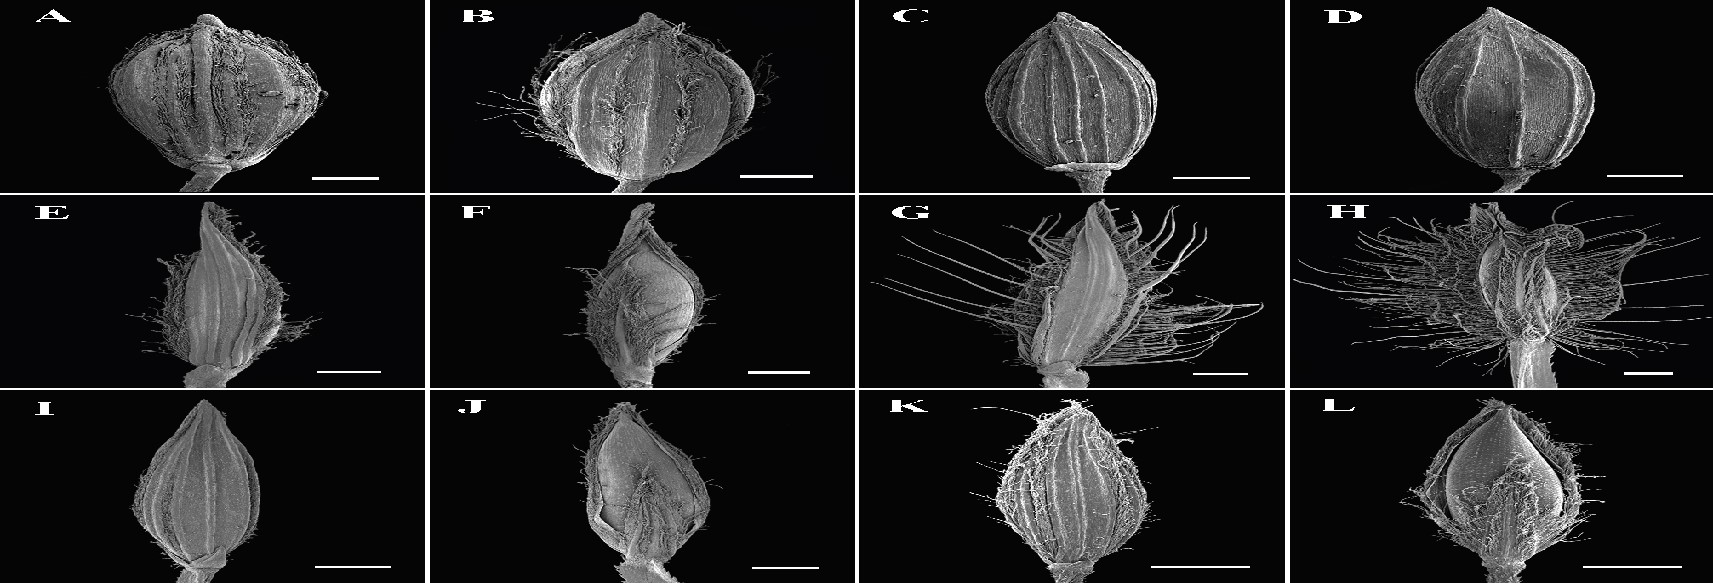 Fig. 5. SEM images showing the front and back of spikelets from a spikelet pair of Digitaria bicornis from Boonsuk et al (2016). Arrow in images (E) and (G) showing small lower glume on lower and upper spikelets respectively and arrow in images (F) and (H) showing upper glume > 1 mm on lower and upper spikelet. Scale bar = 400 µmm. (CC By: Boonsuk et al. 2016)